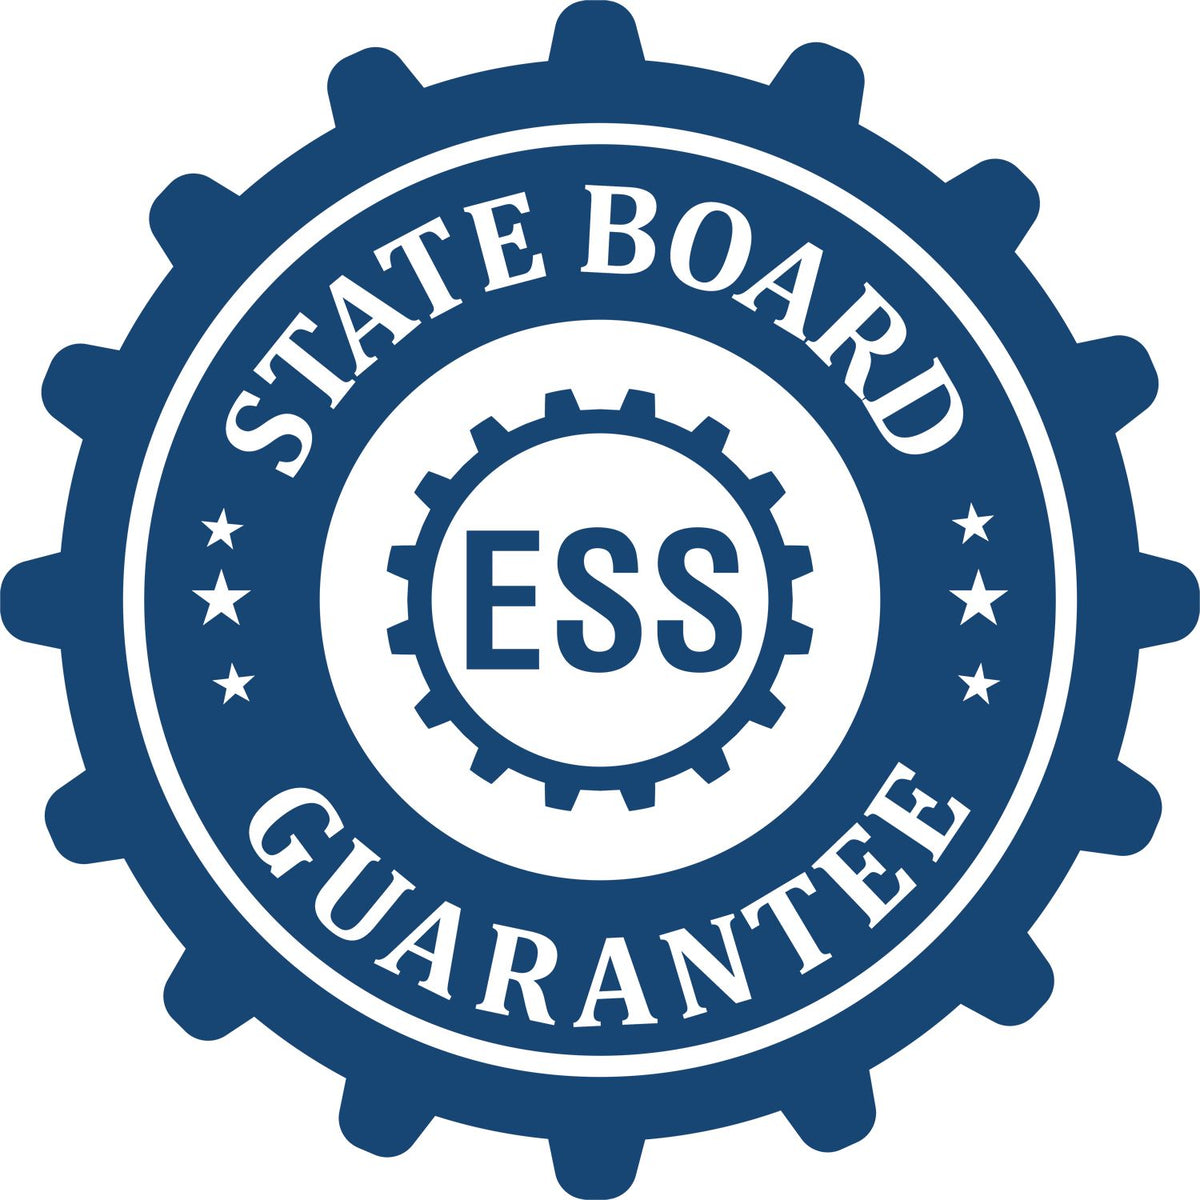 An emblem in a gear shape illustrating a state board guarantee for the Hybrid Montana Geologist Seal